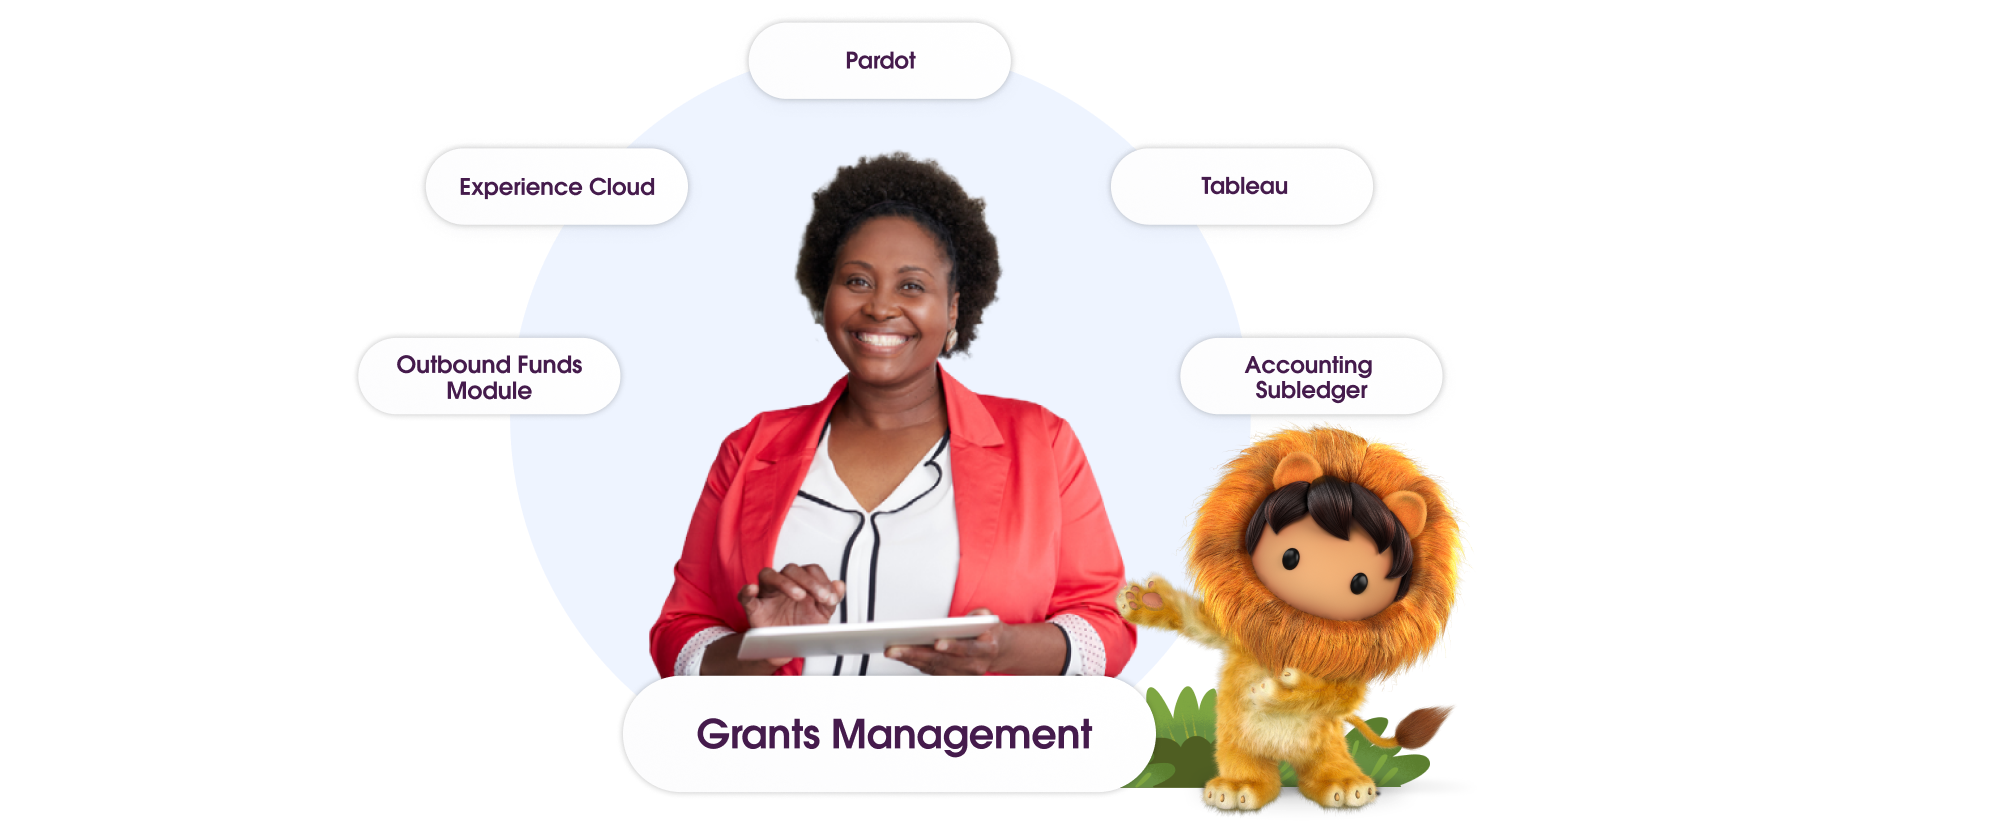 Grants management solution graphic with connections to Pardot, Tableau, Experience Cloud, Accounting Subledger, and Outbound Funds module